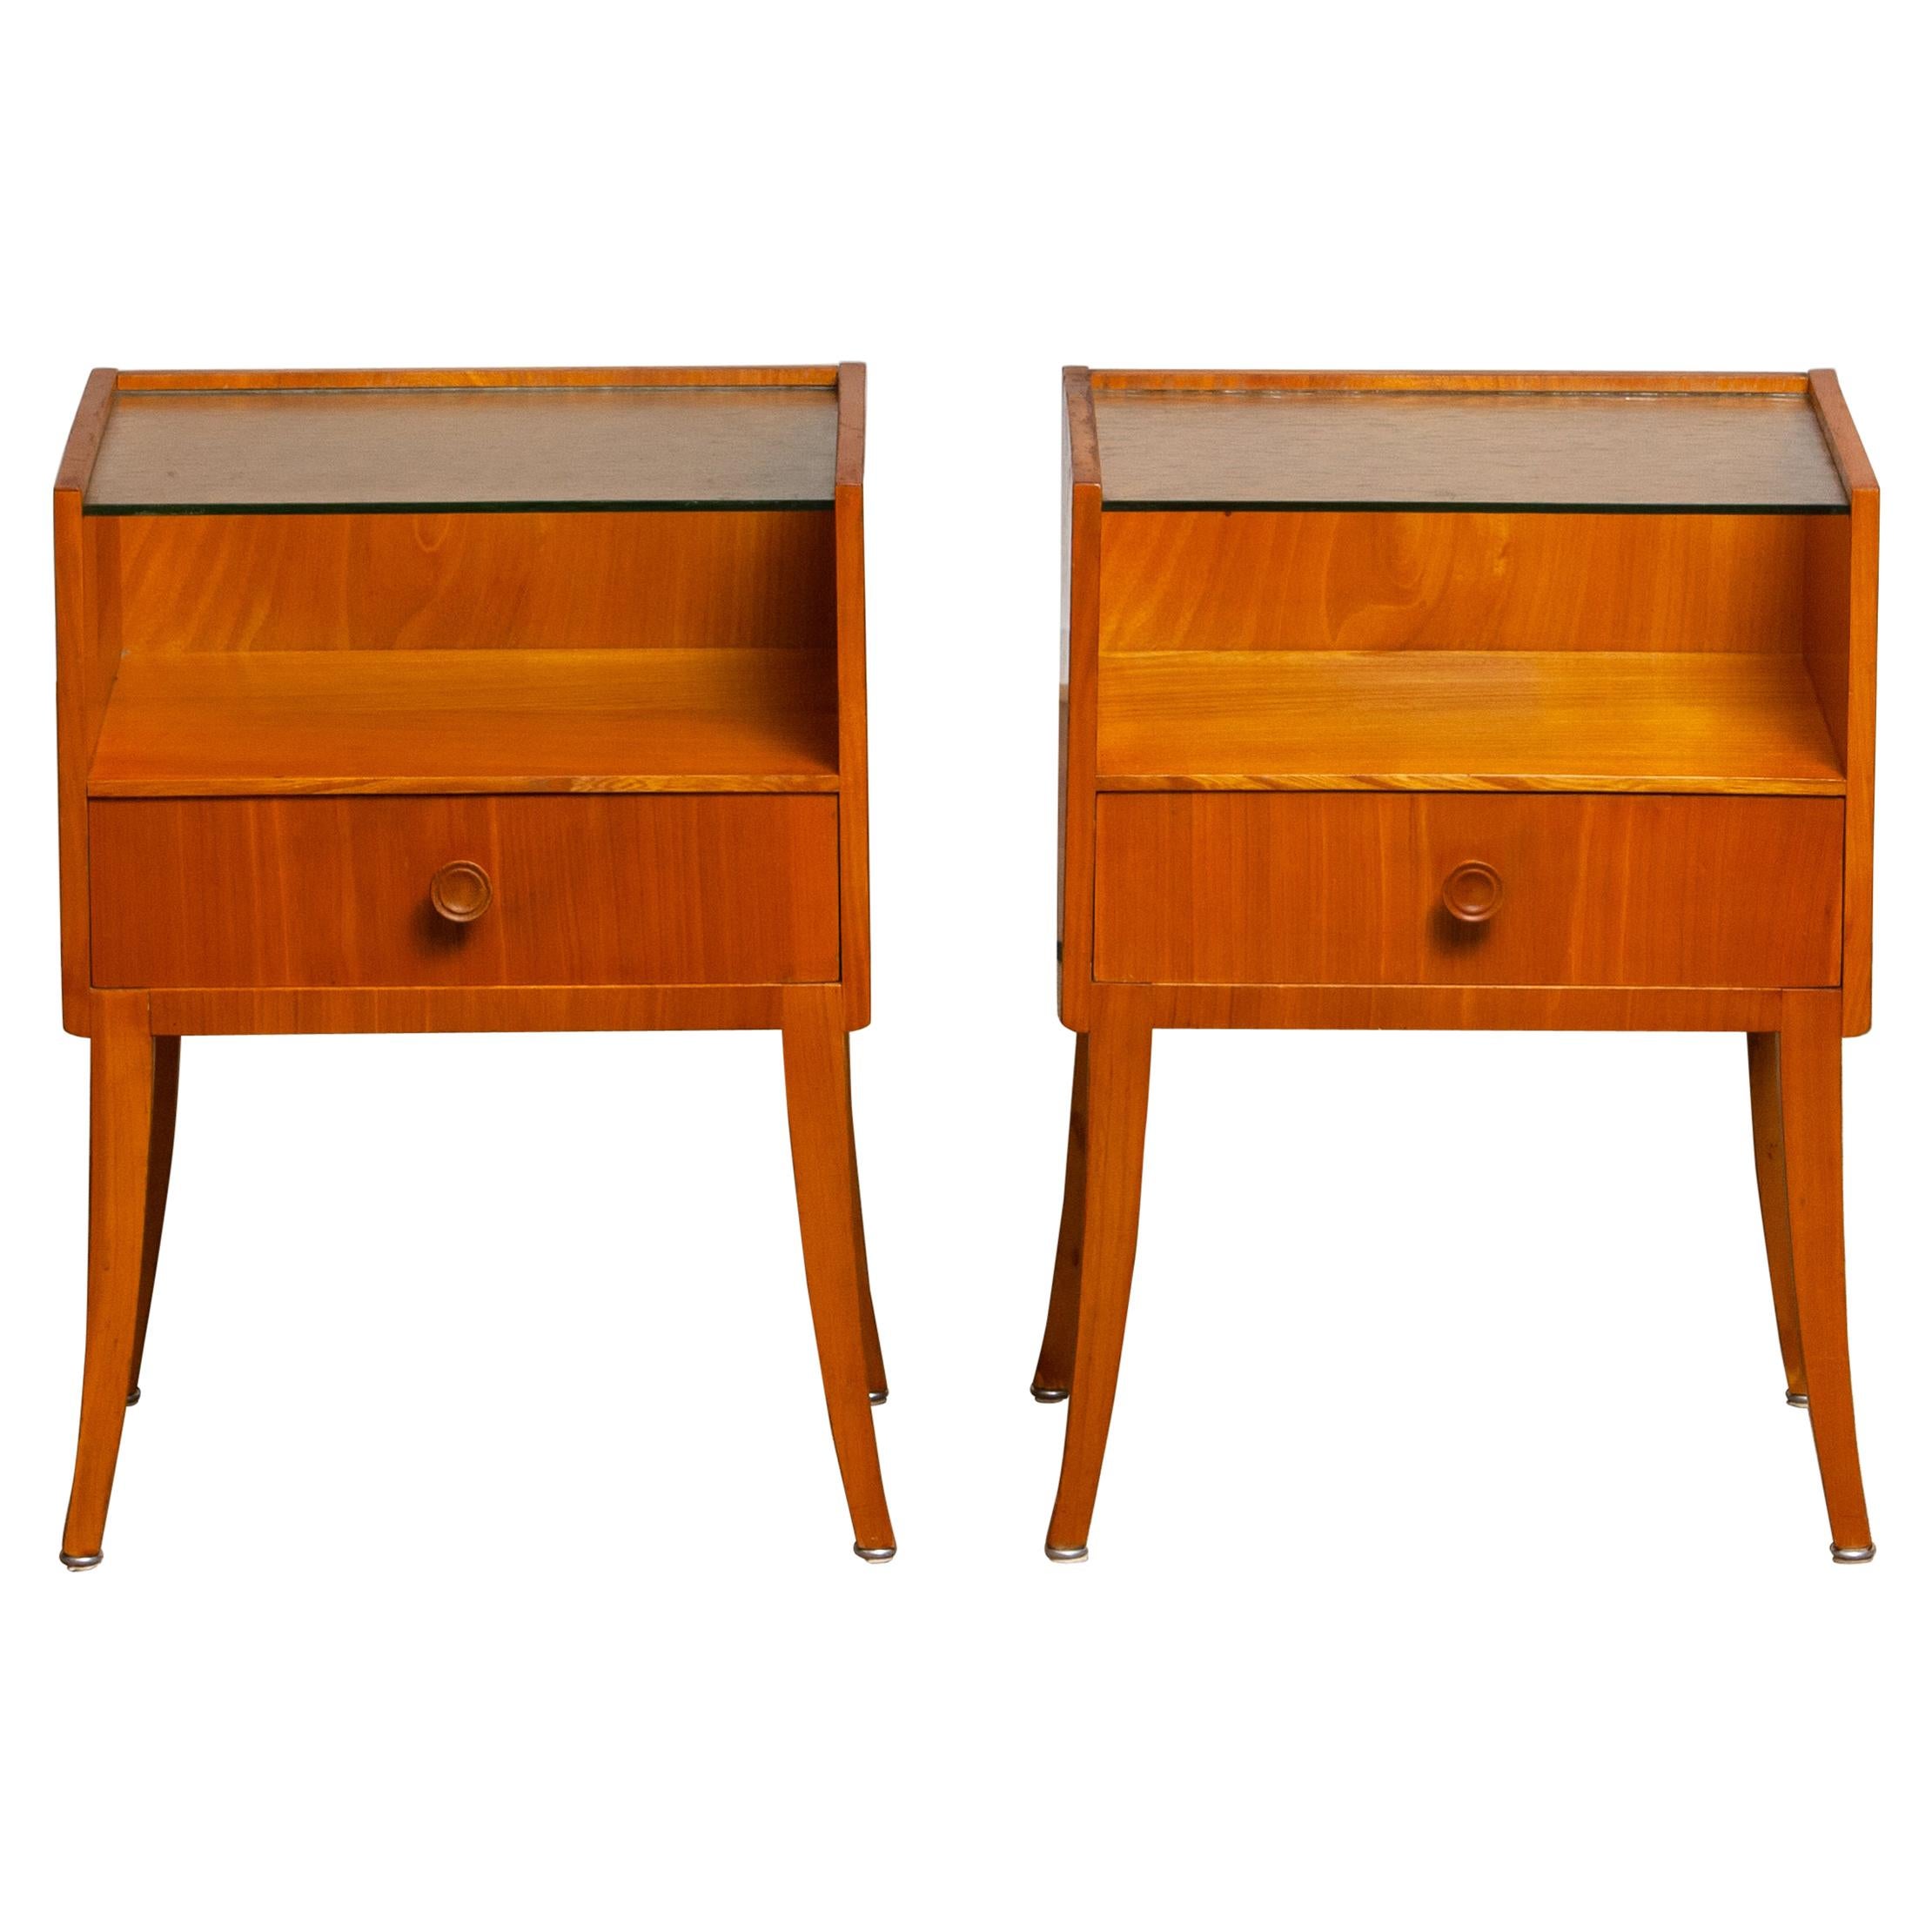 1950s Pair of Nightstands or Bedside Tables from Sweden in Elm with Glass Top